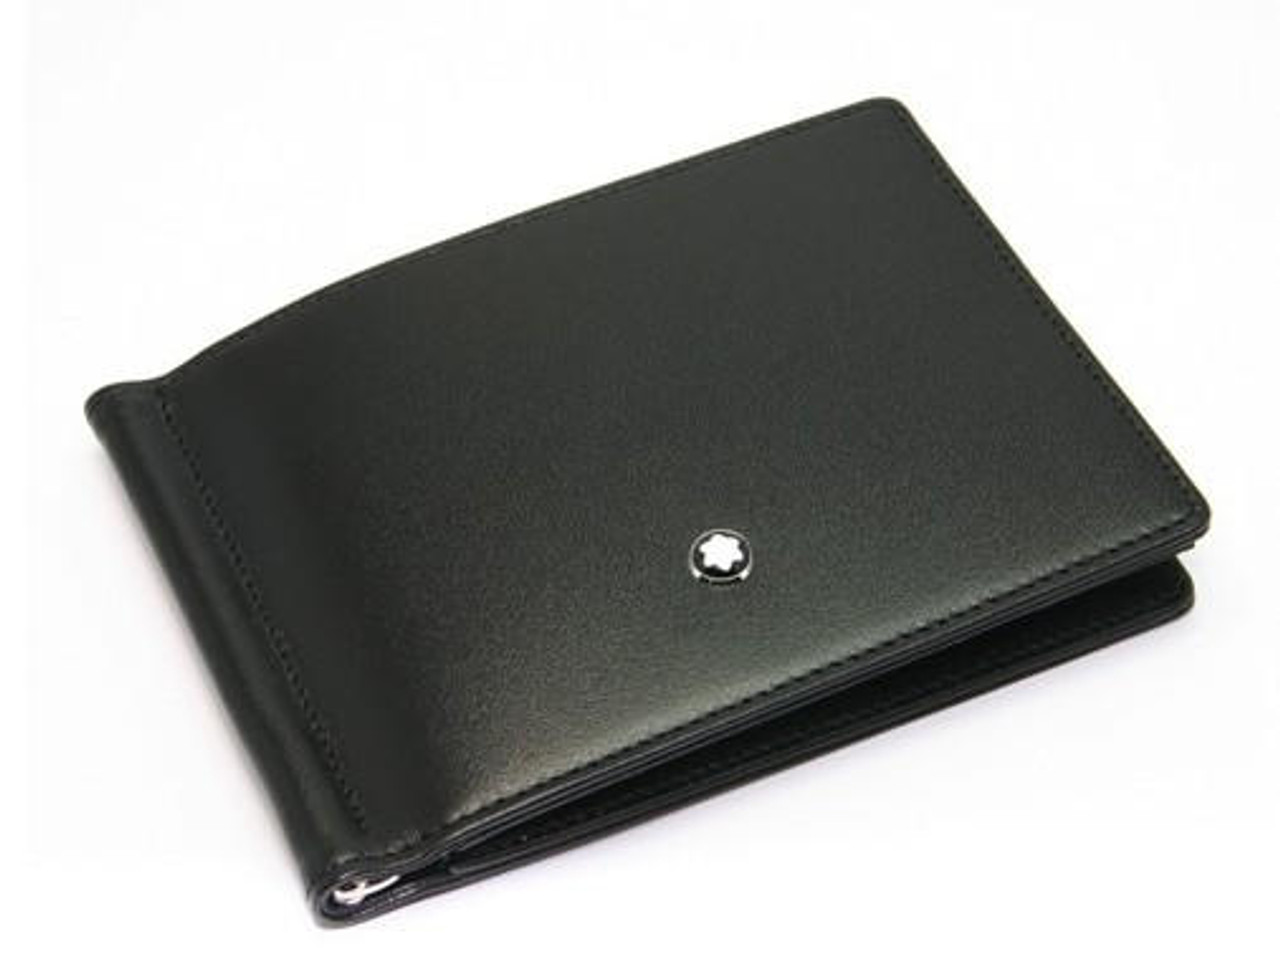 Montblanc Meisterstuck 6cc Leather Wallet with Money Clip Black